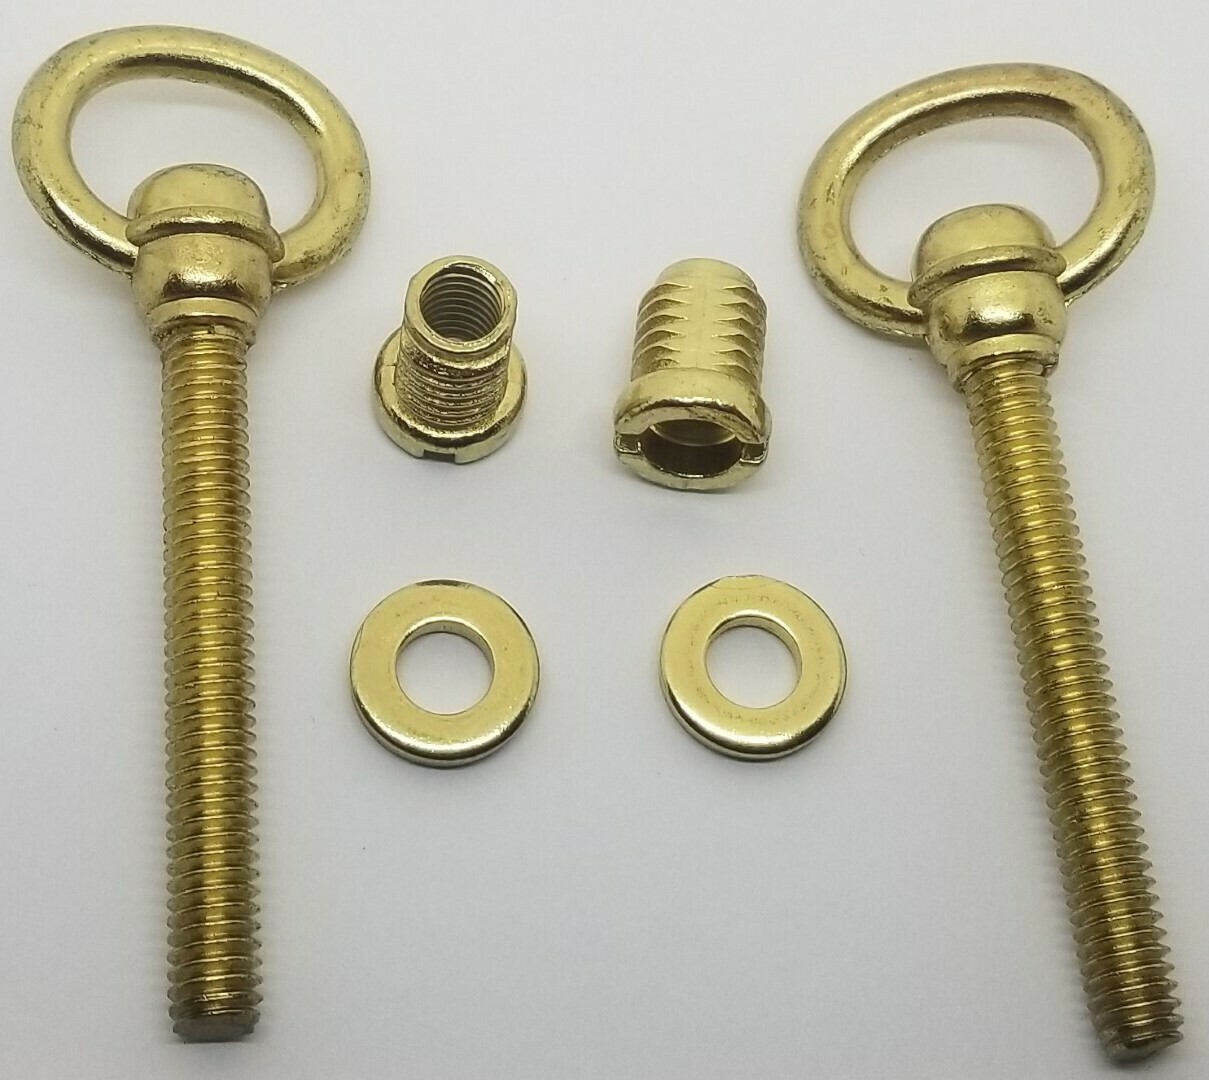 SMALL 3-1/2 Inch Polished Brass Steel Cheval Mirror Mount Set vintage retro old kit screws